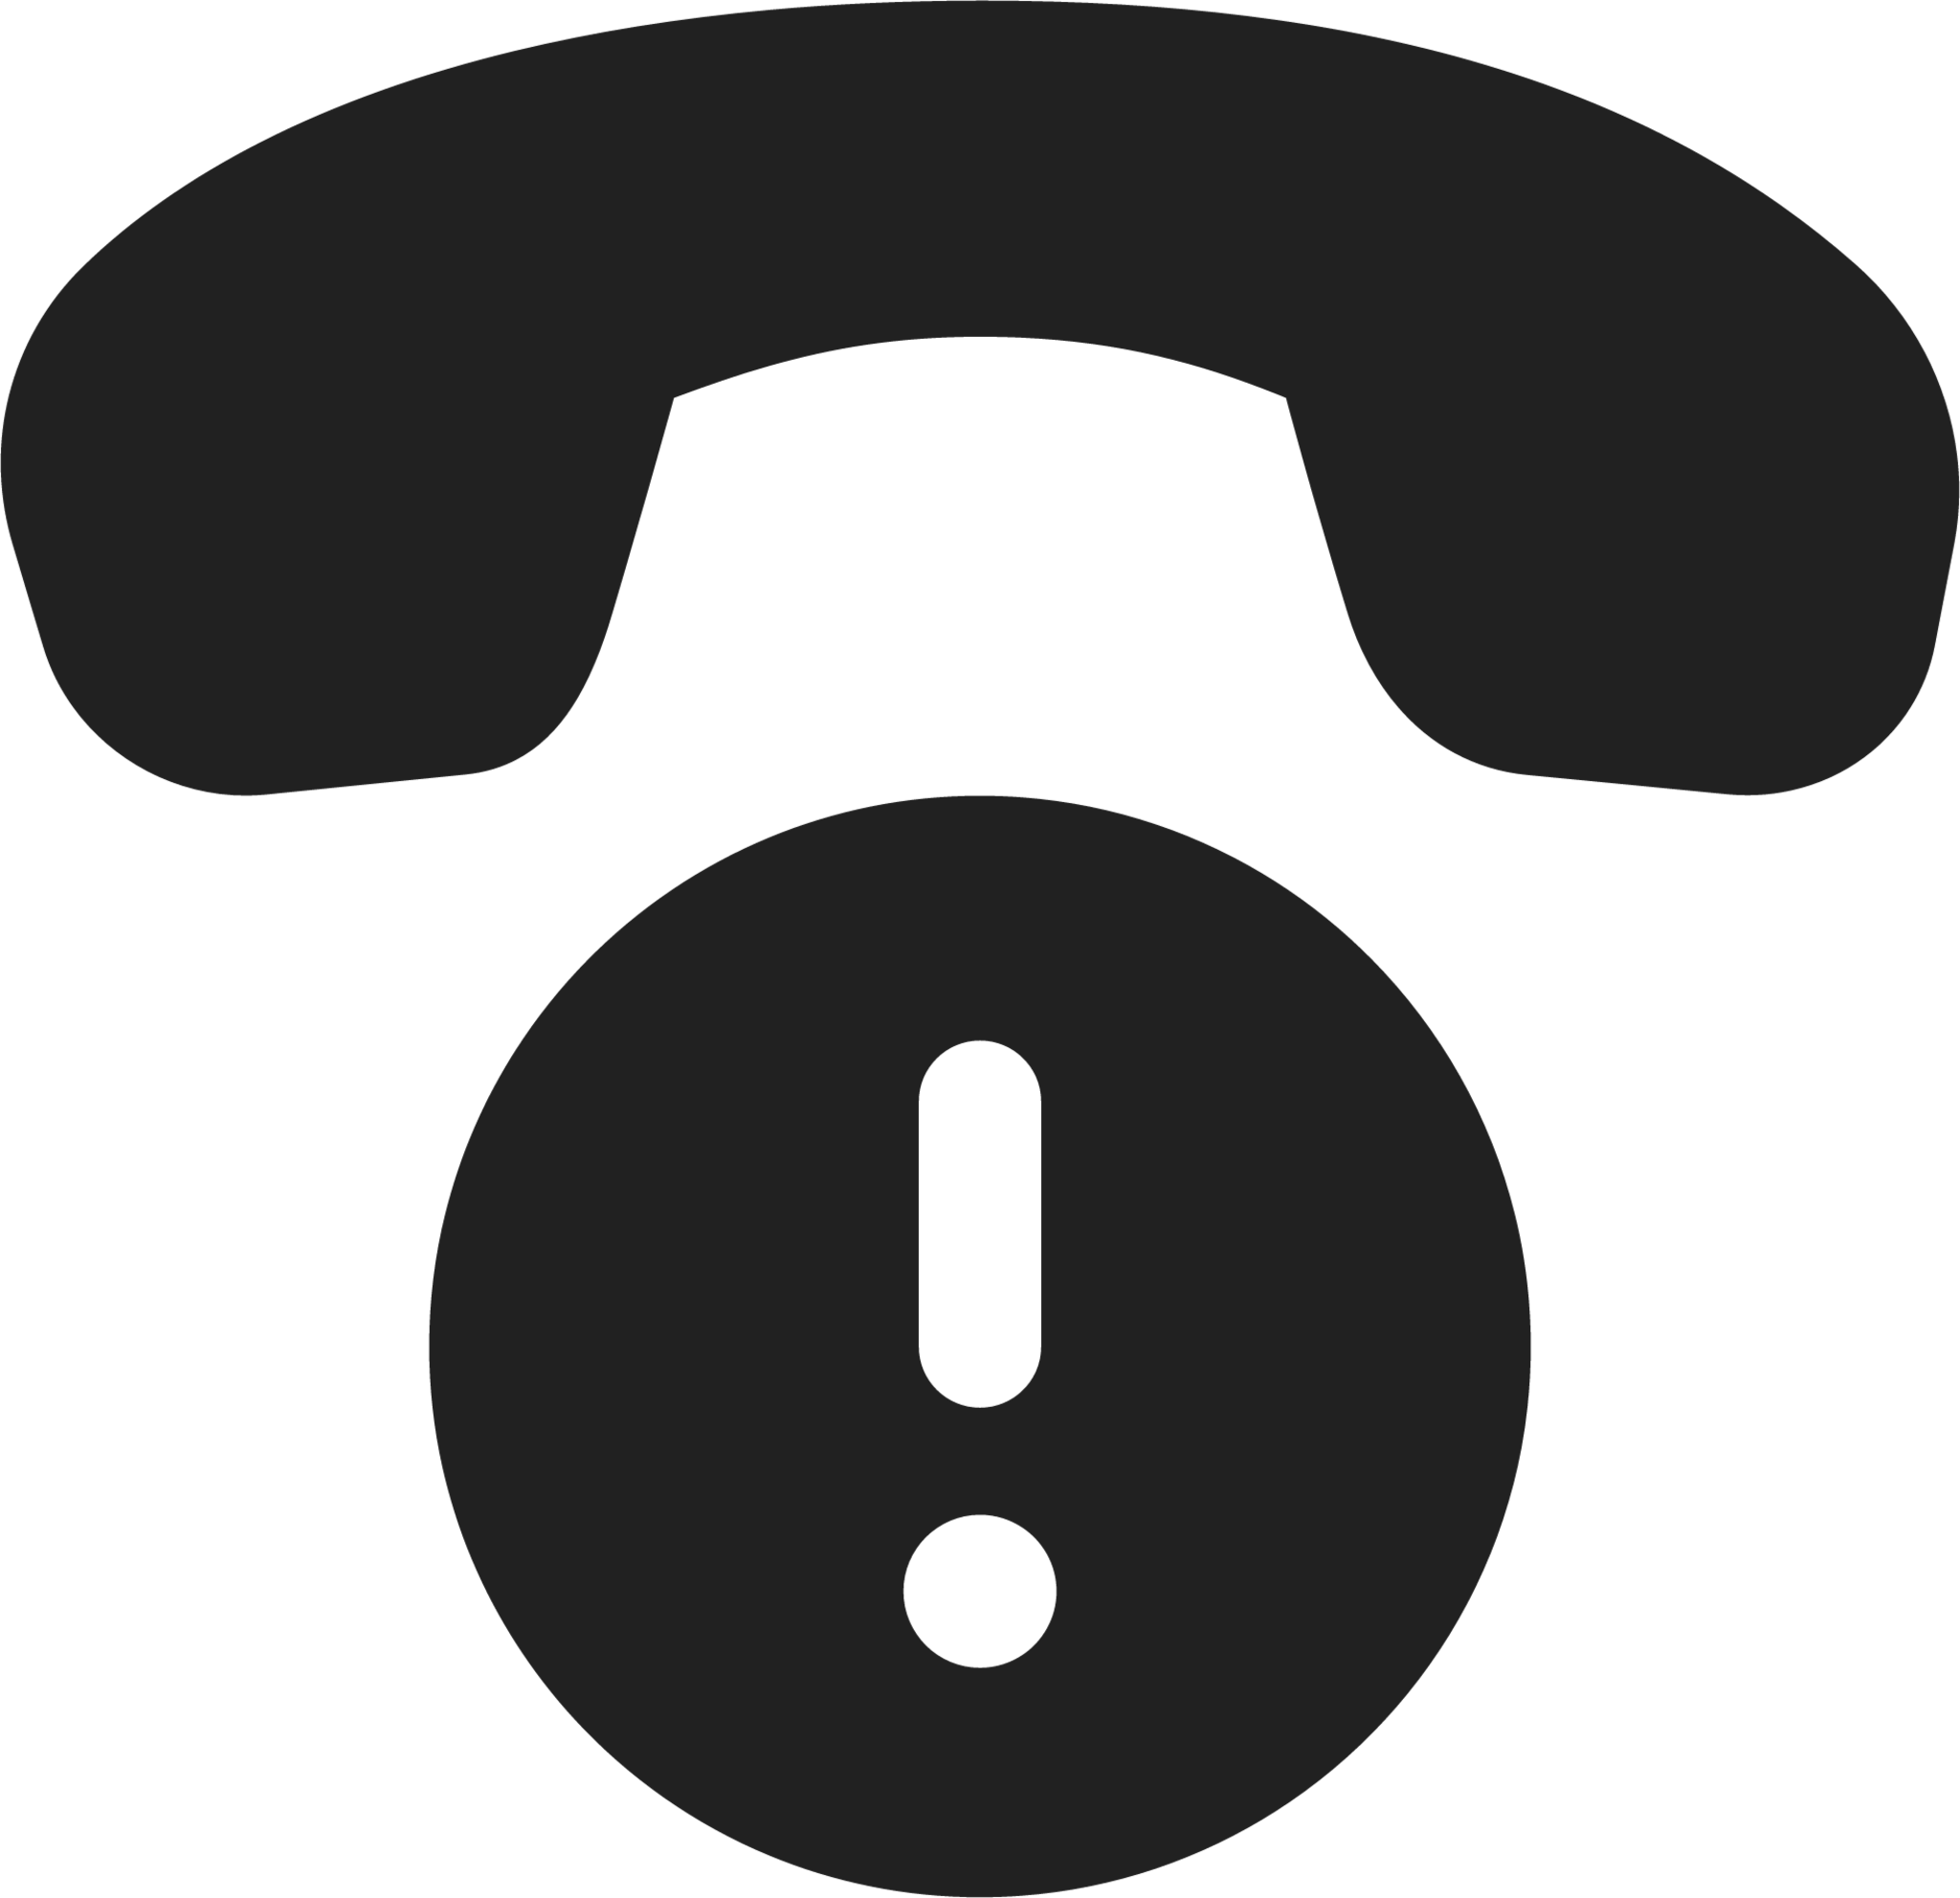 Call Exclamation icon